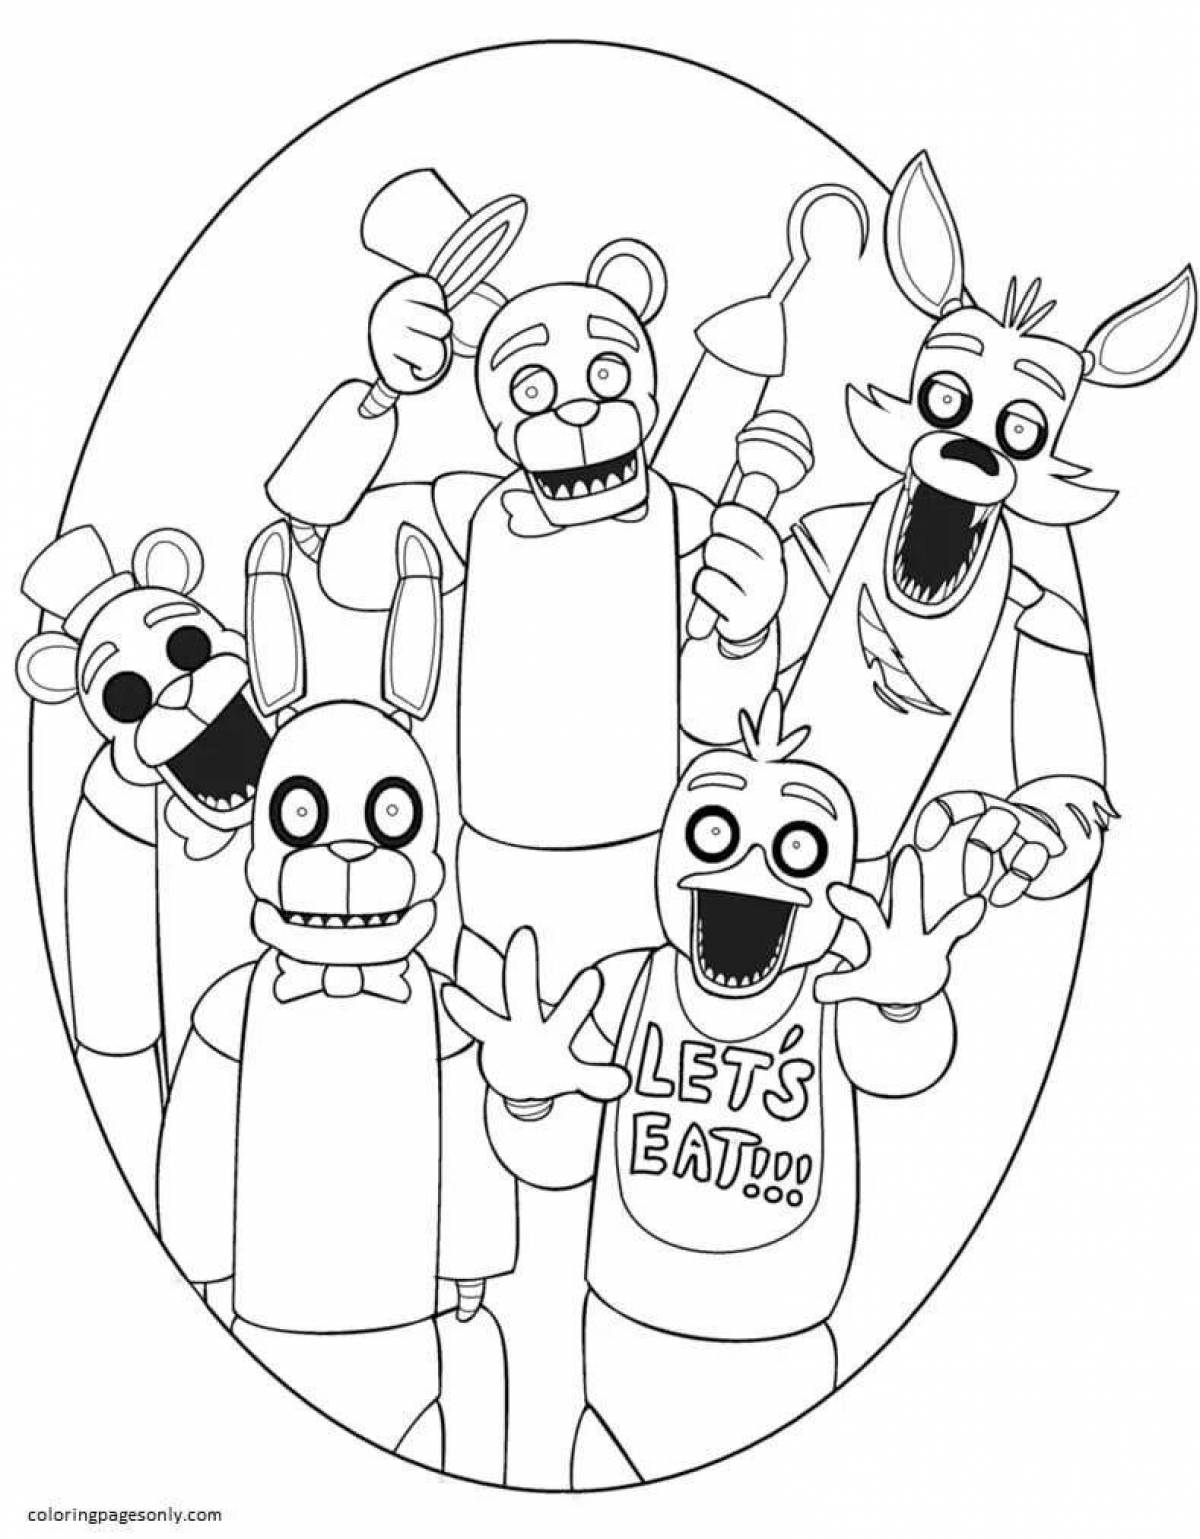 Sweet freddy coloring pages for kids